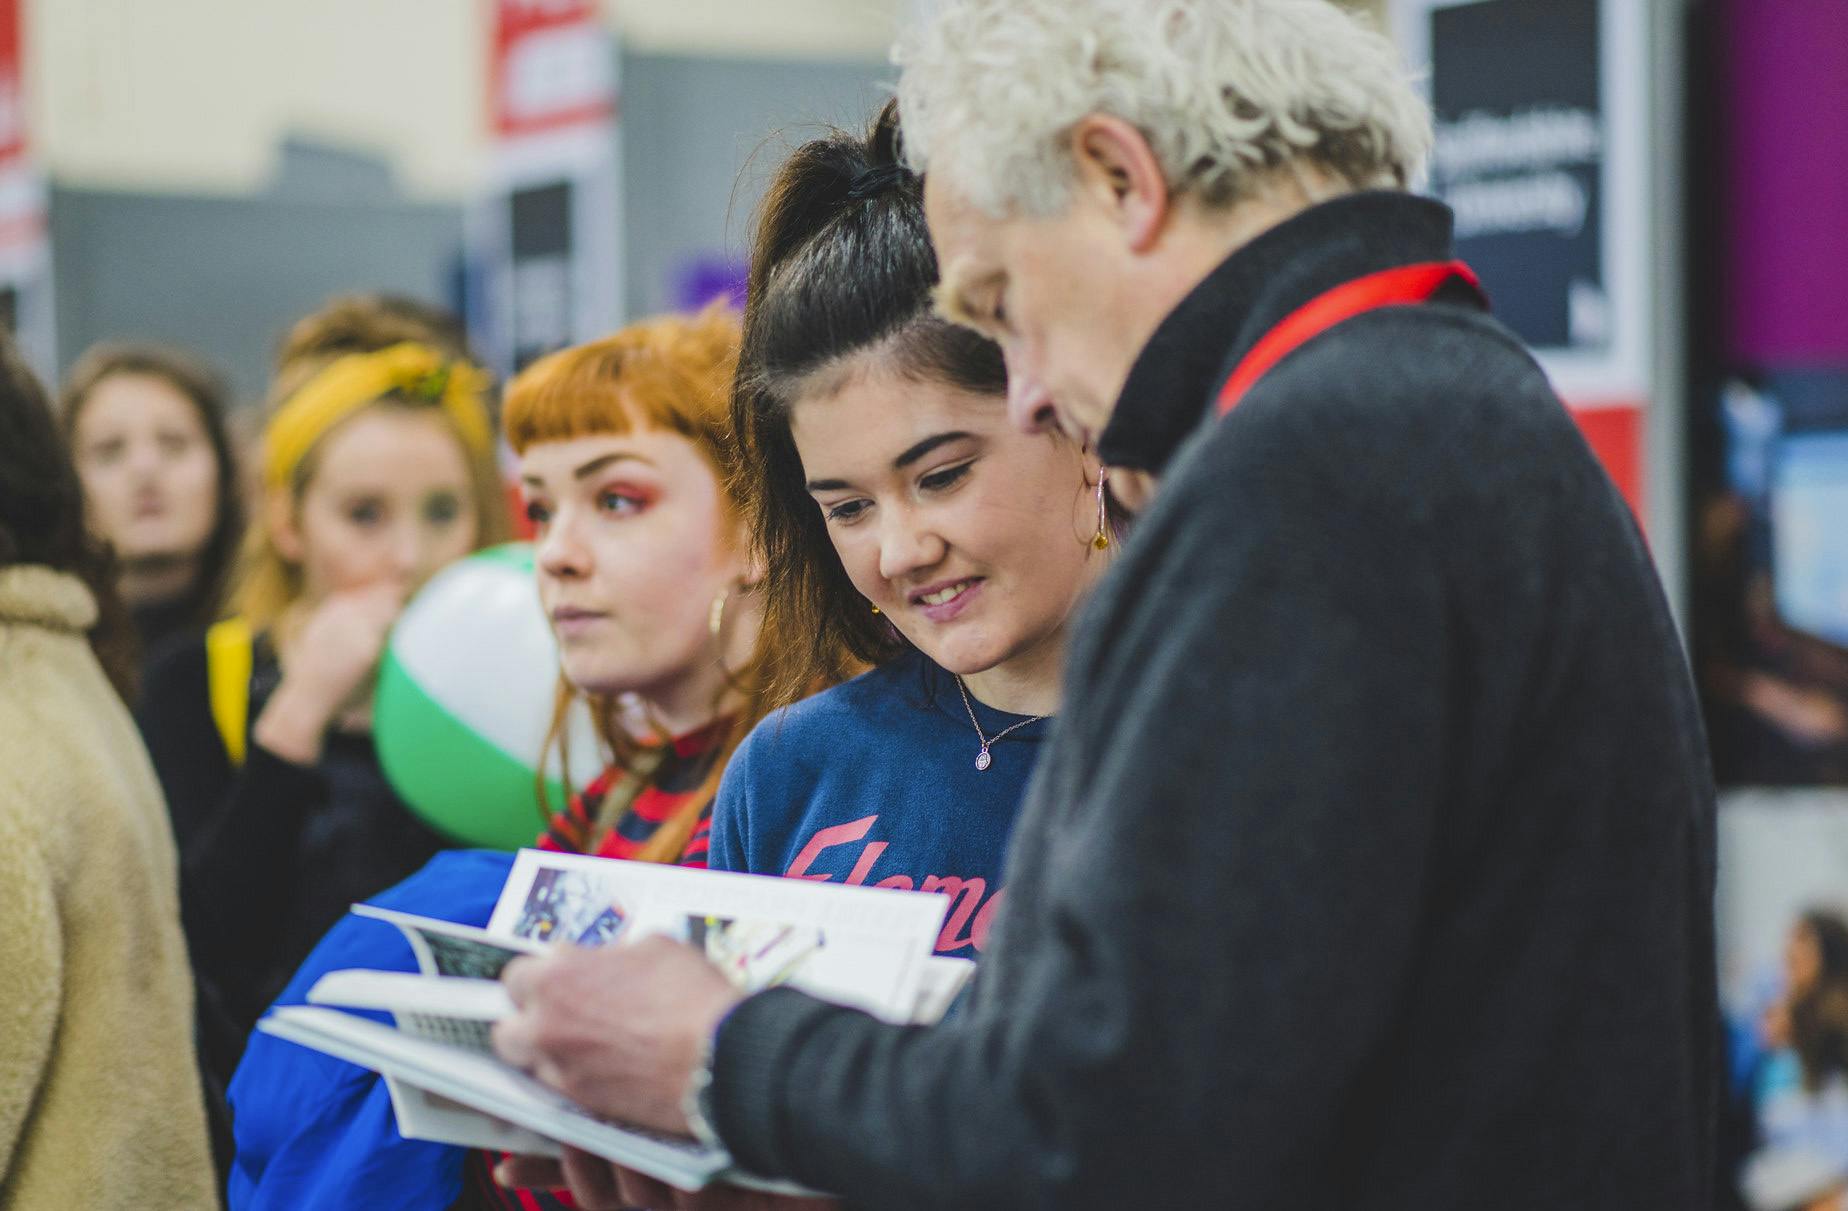 A member of the Plymouth College of Art team speaks to a student showing them a prospectus at a university fair event